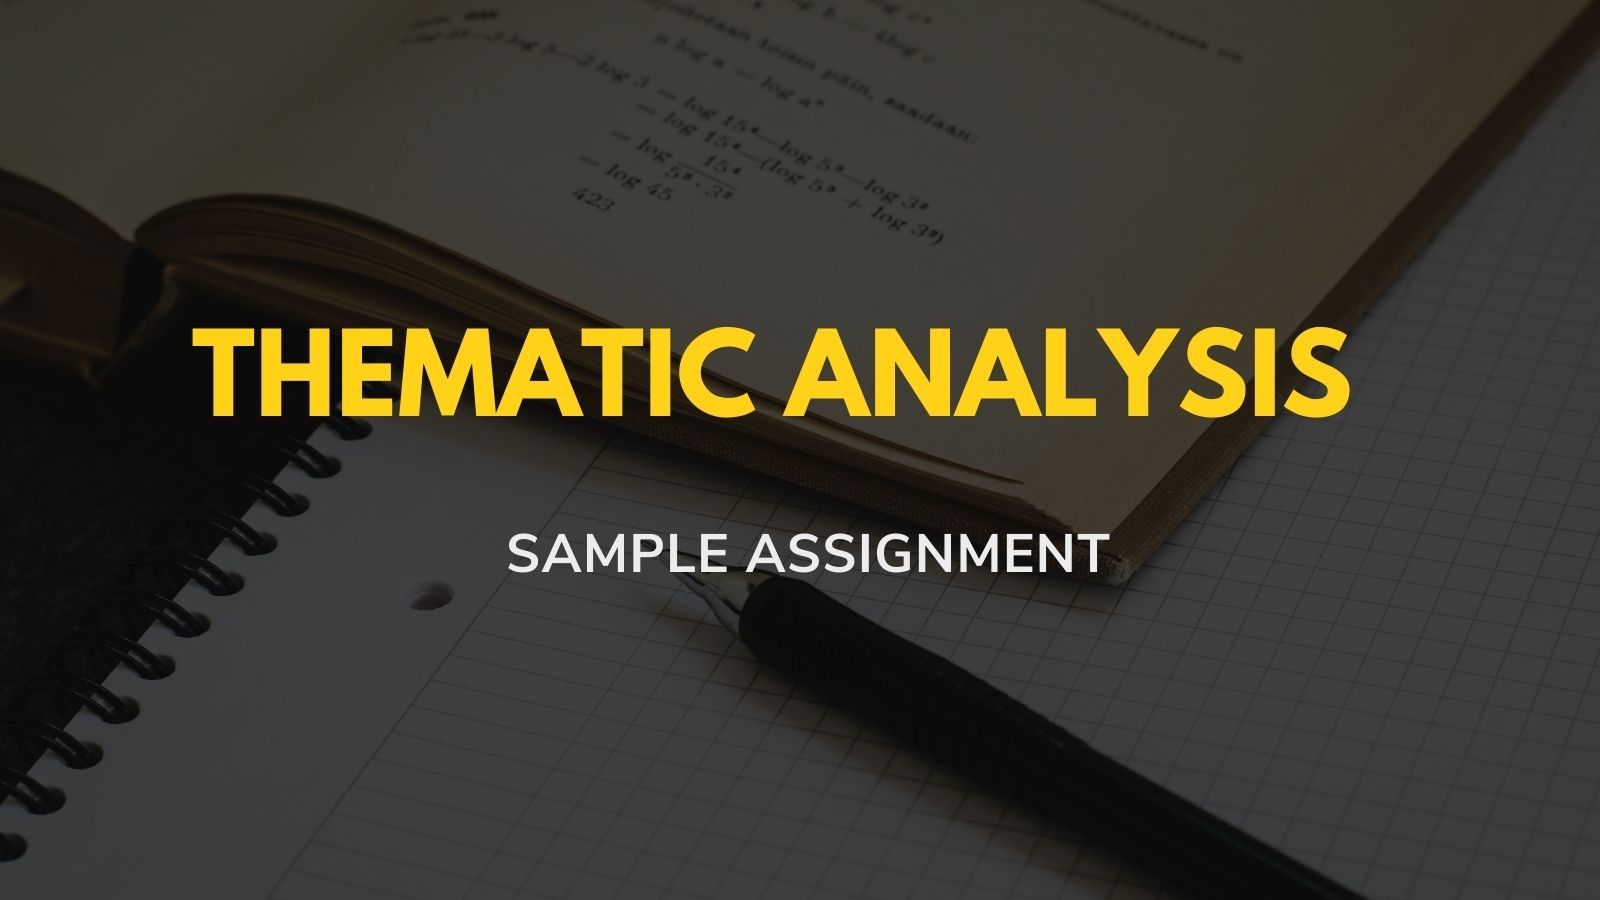 What Is Thematic Analysis, And How To Do It?